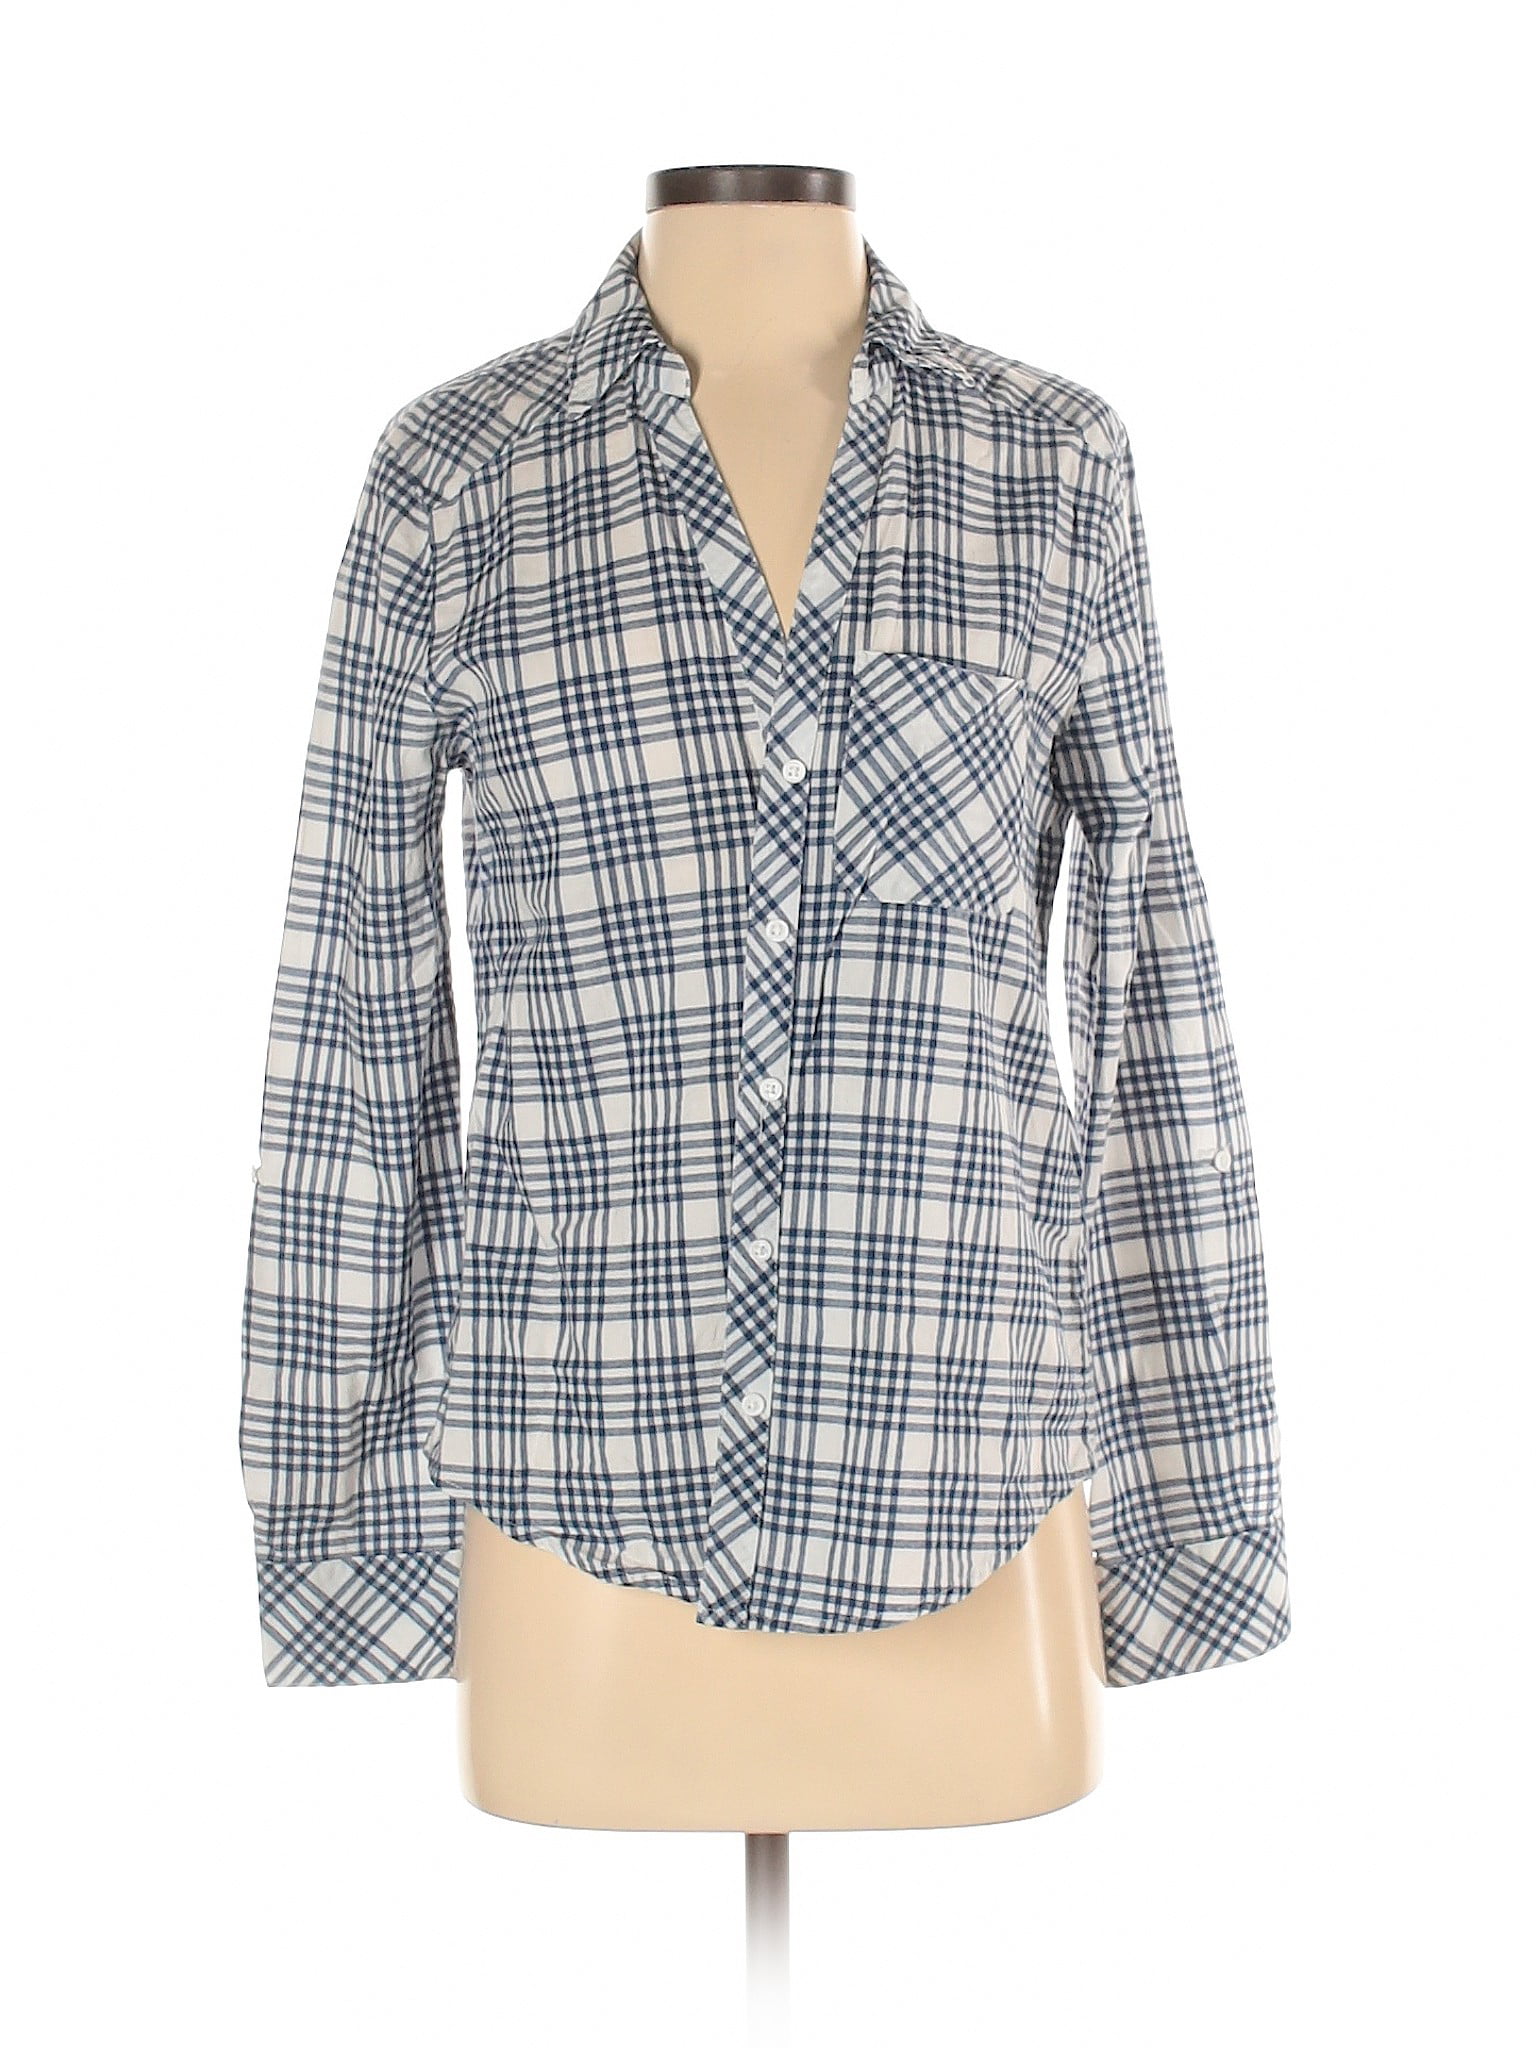 Soft Joie - Pre-Owned Soft Joie Women's Size S Long Sleeve Button-Down ...